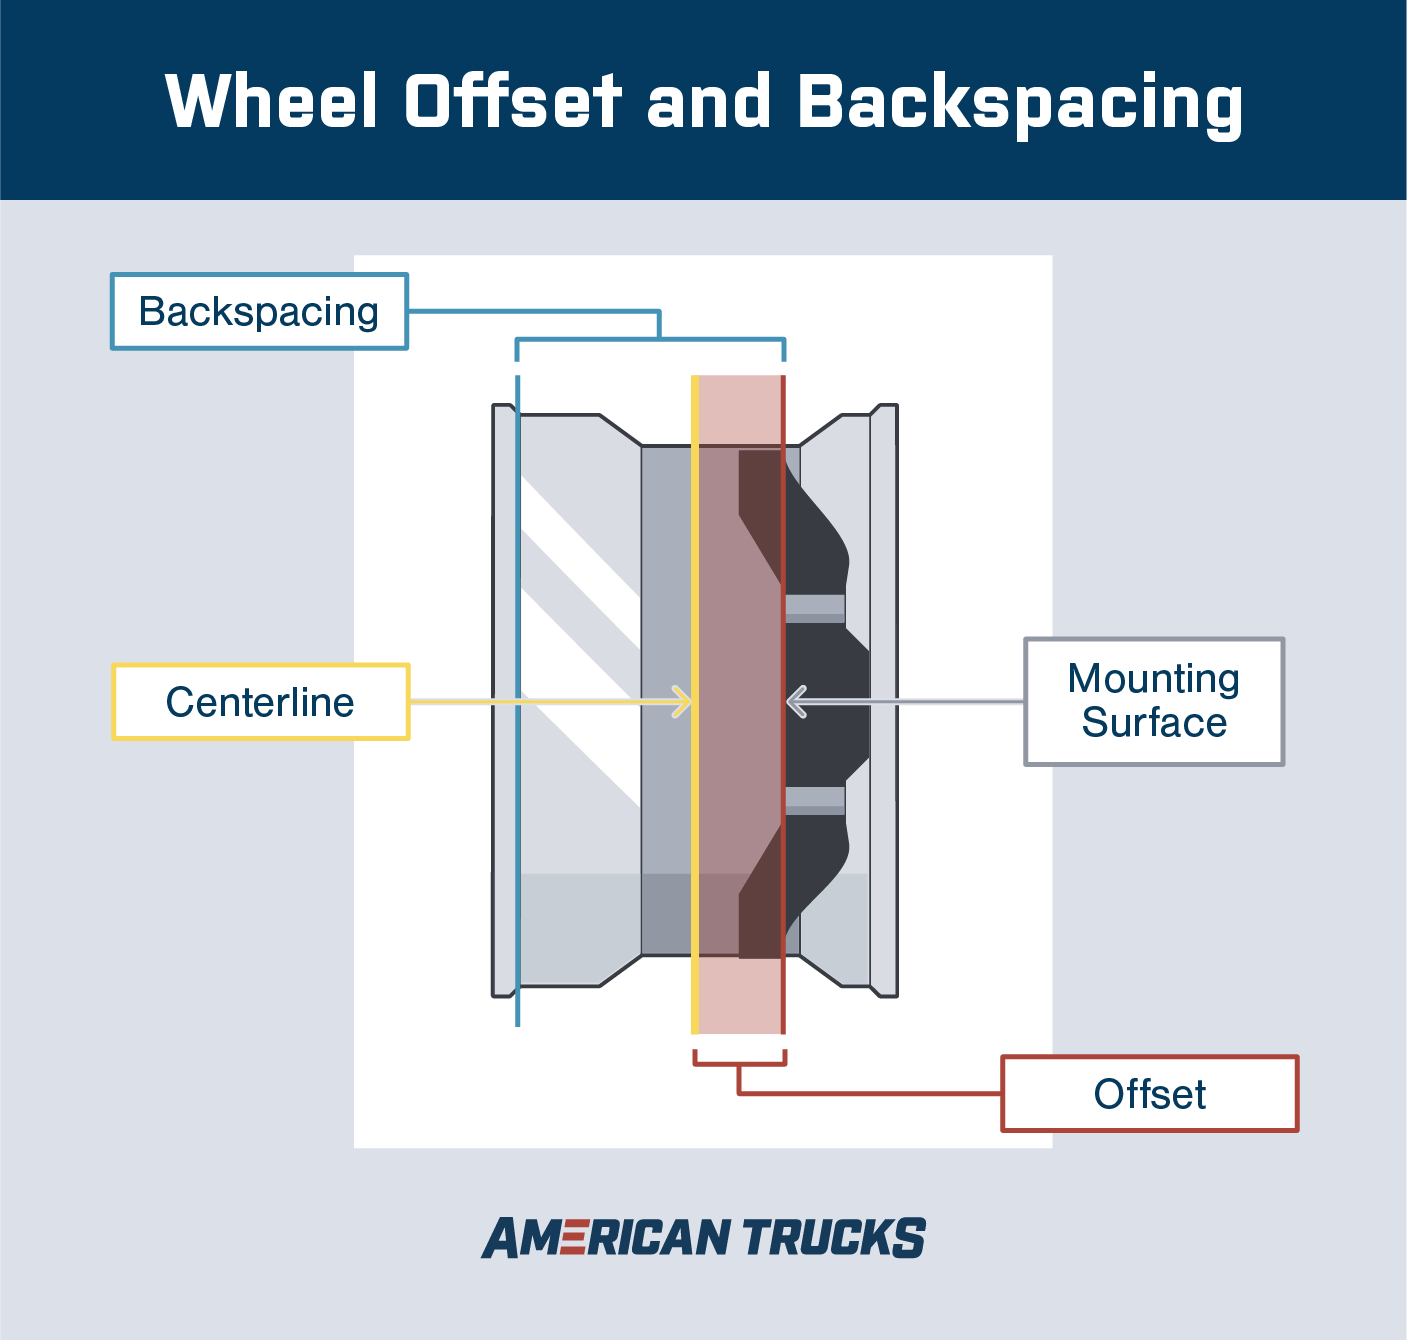 Illustration showing wheel offset and backspacing with the centerline, the mounting surface, backspacing, and offset